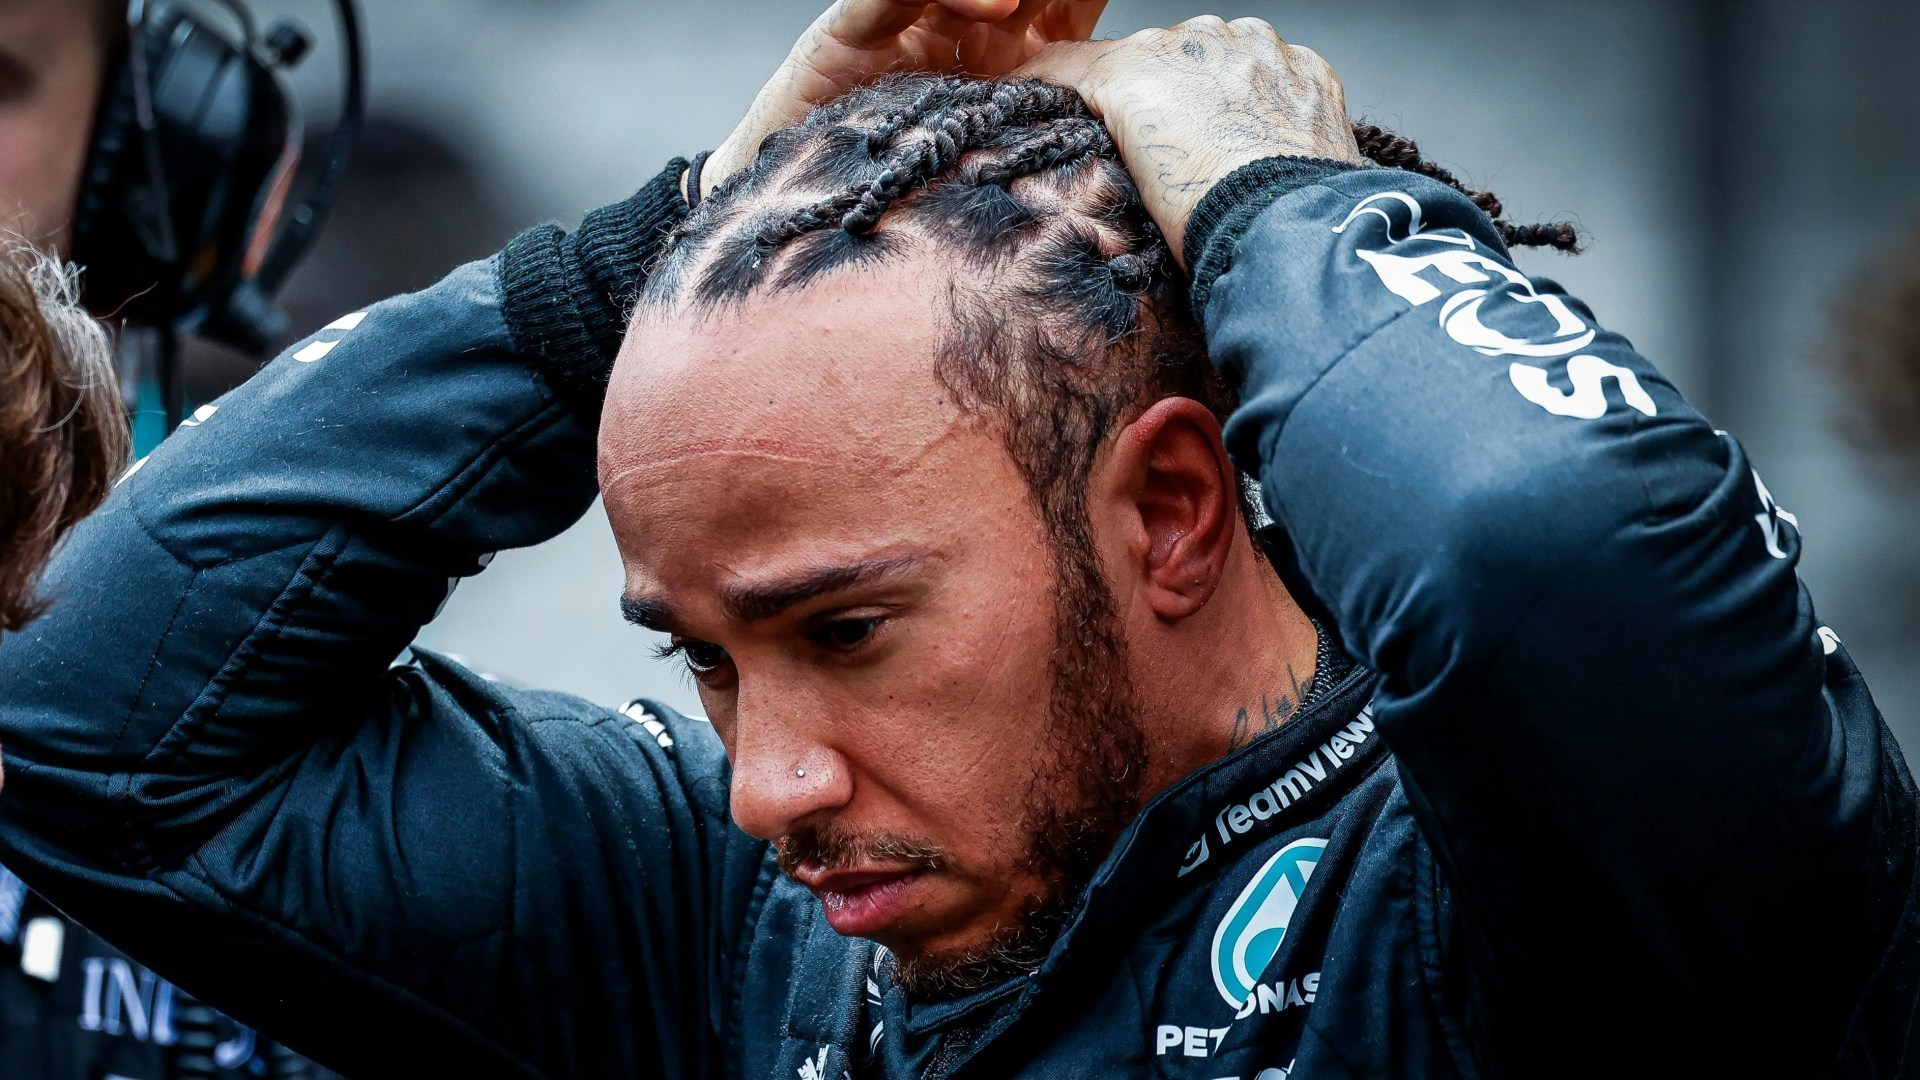 Hamilton suffers shock early elimination in qualifying for Chinese Grand Prix and will start 18th on the grid